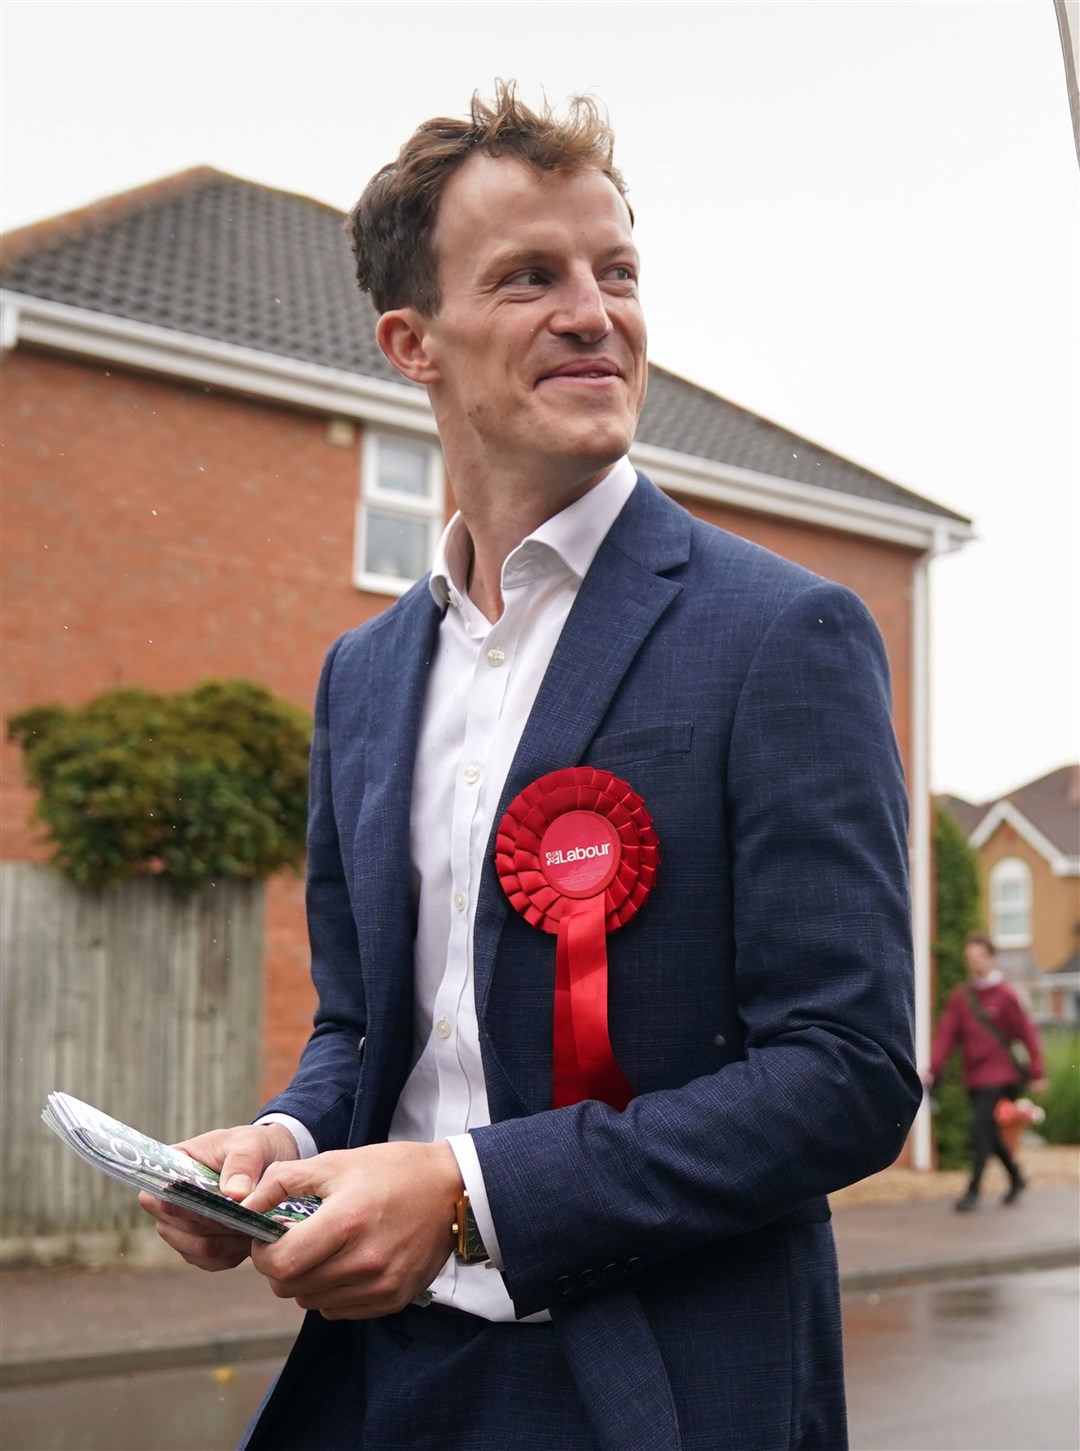 Labour candidate Alistair Strathern (PA)